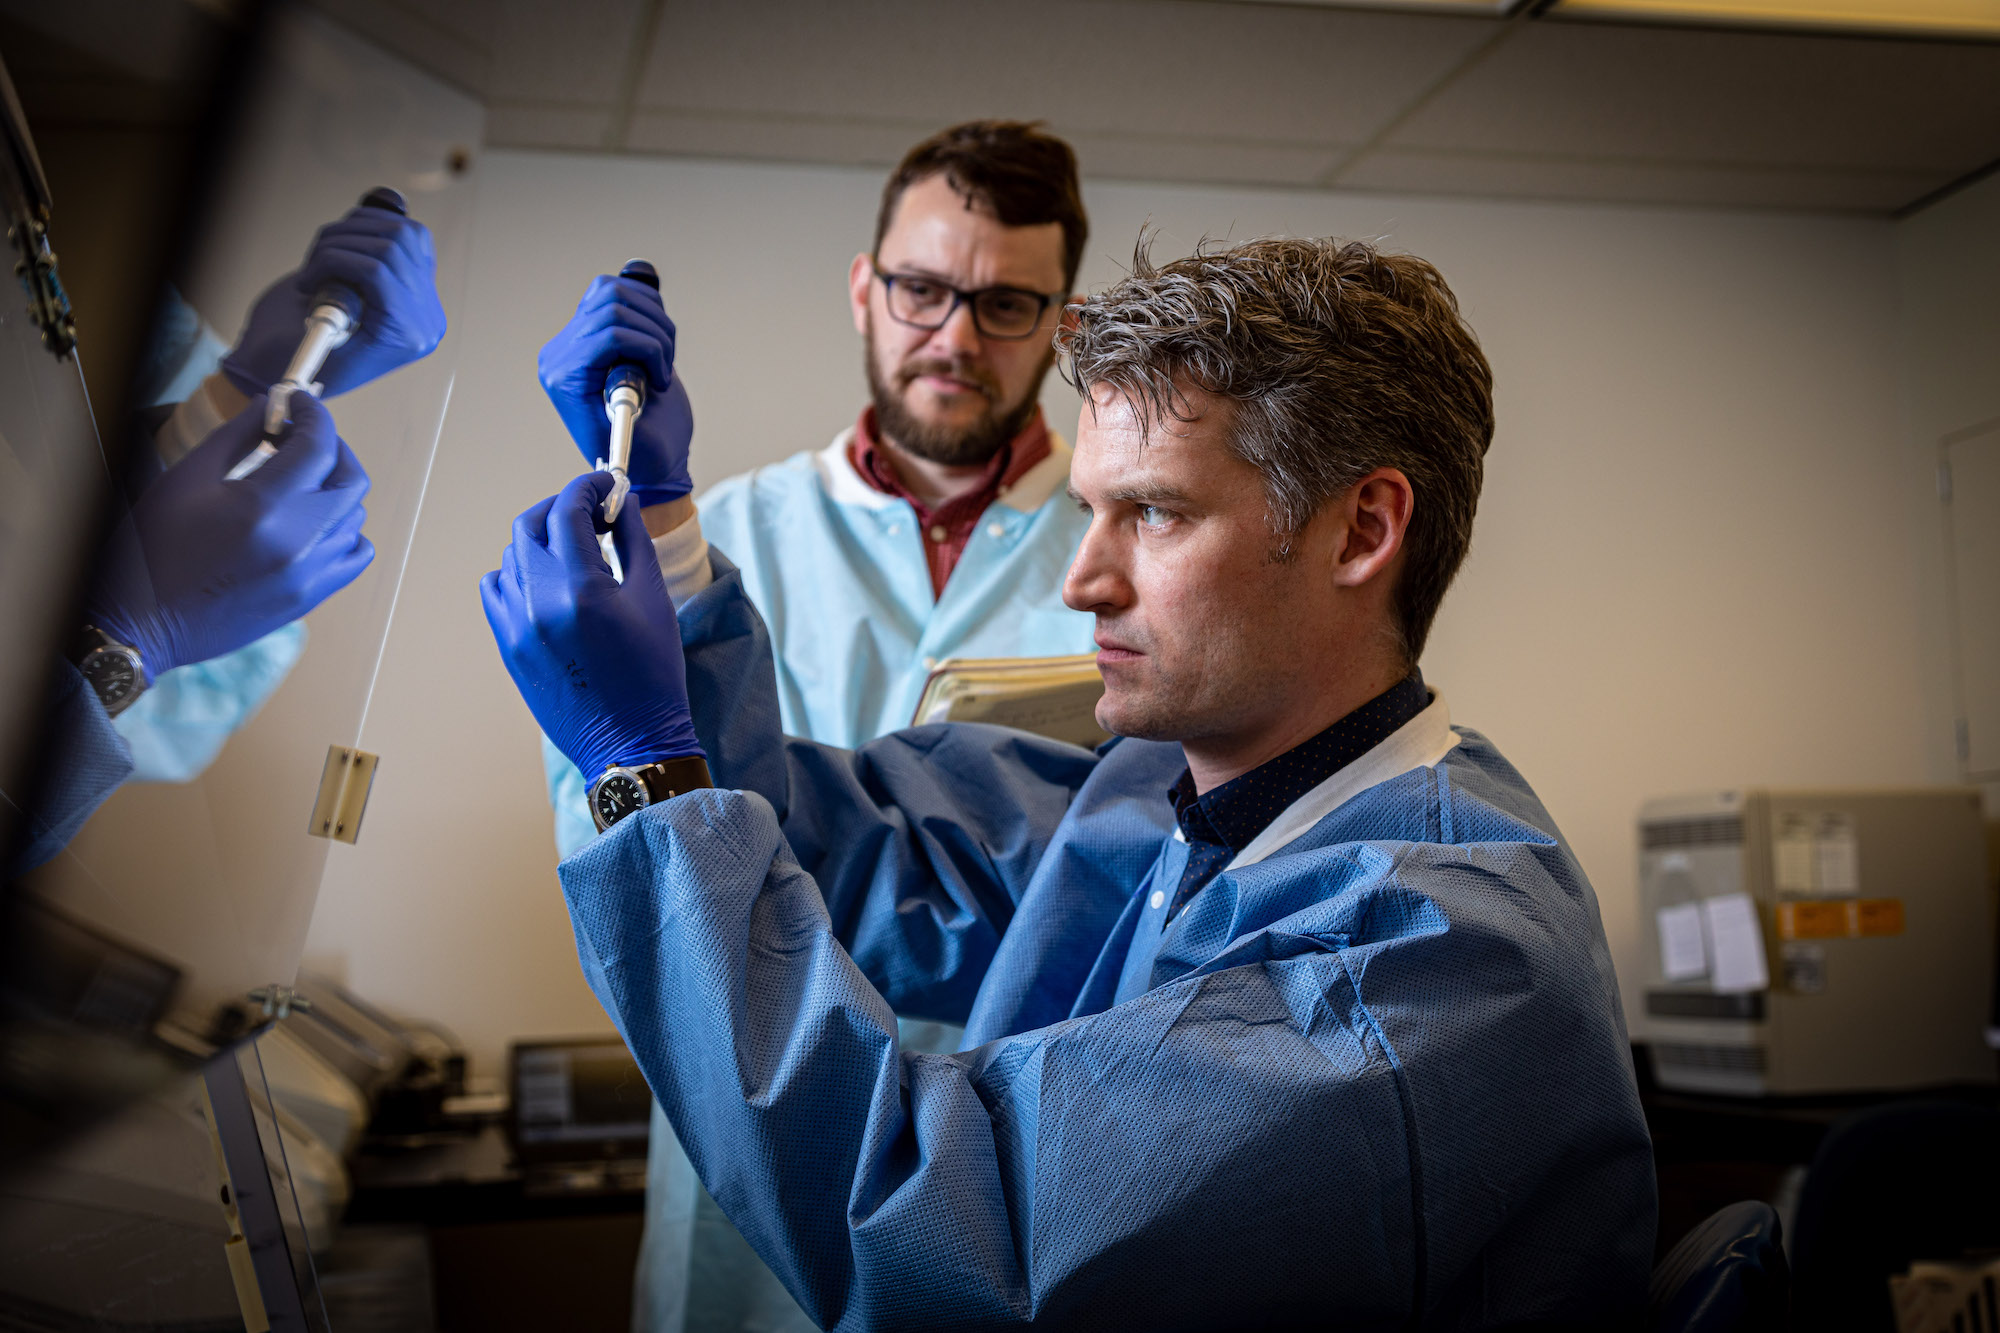 Peter Thielen, front, works with Tom Mehoke on immediate sequencing of the SARS-CoV-2 genome, the virus that causes COVID-19, at the Johns Hopkins Hospital molecular diagnostics laboratory.